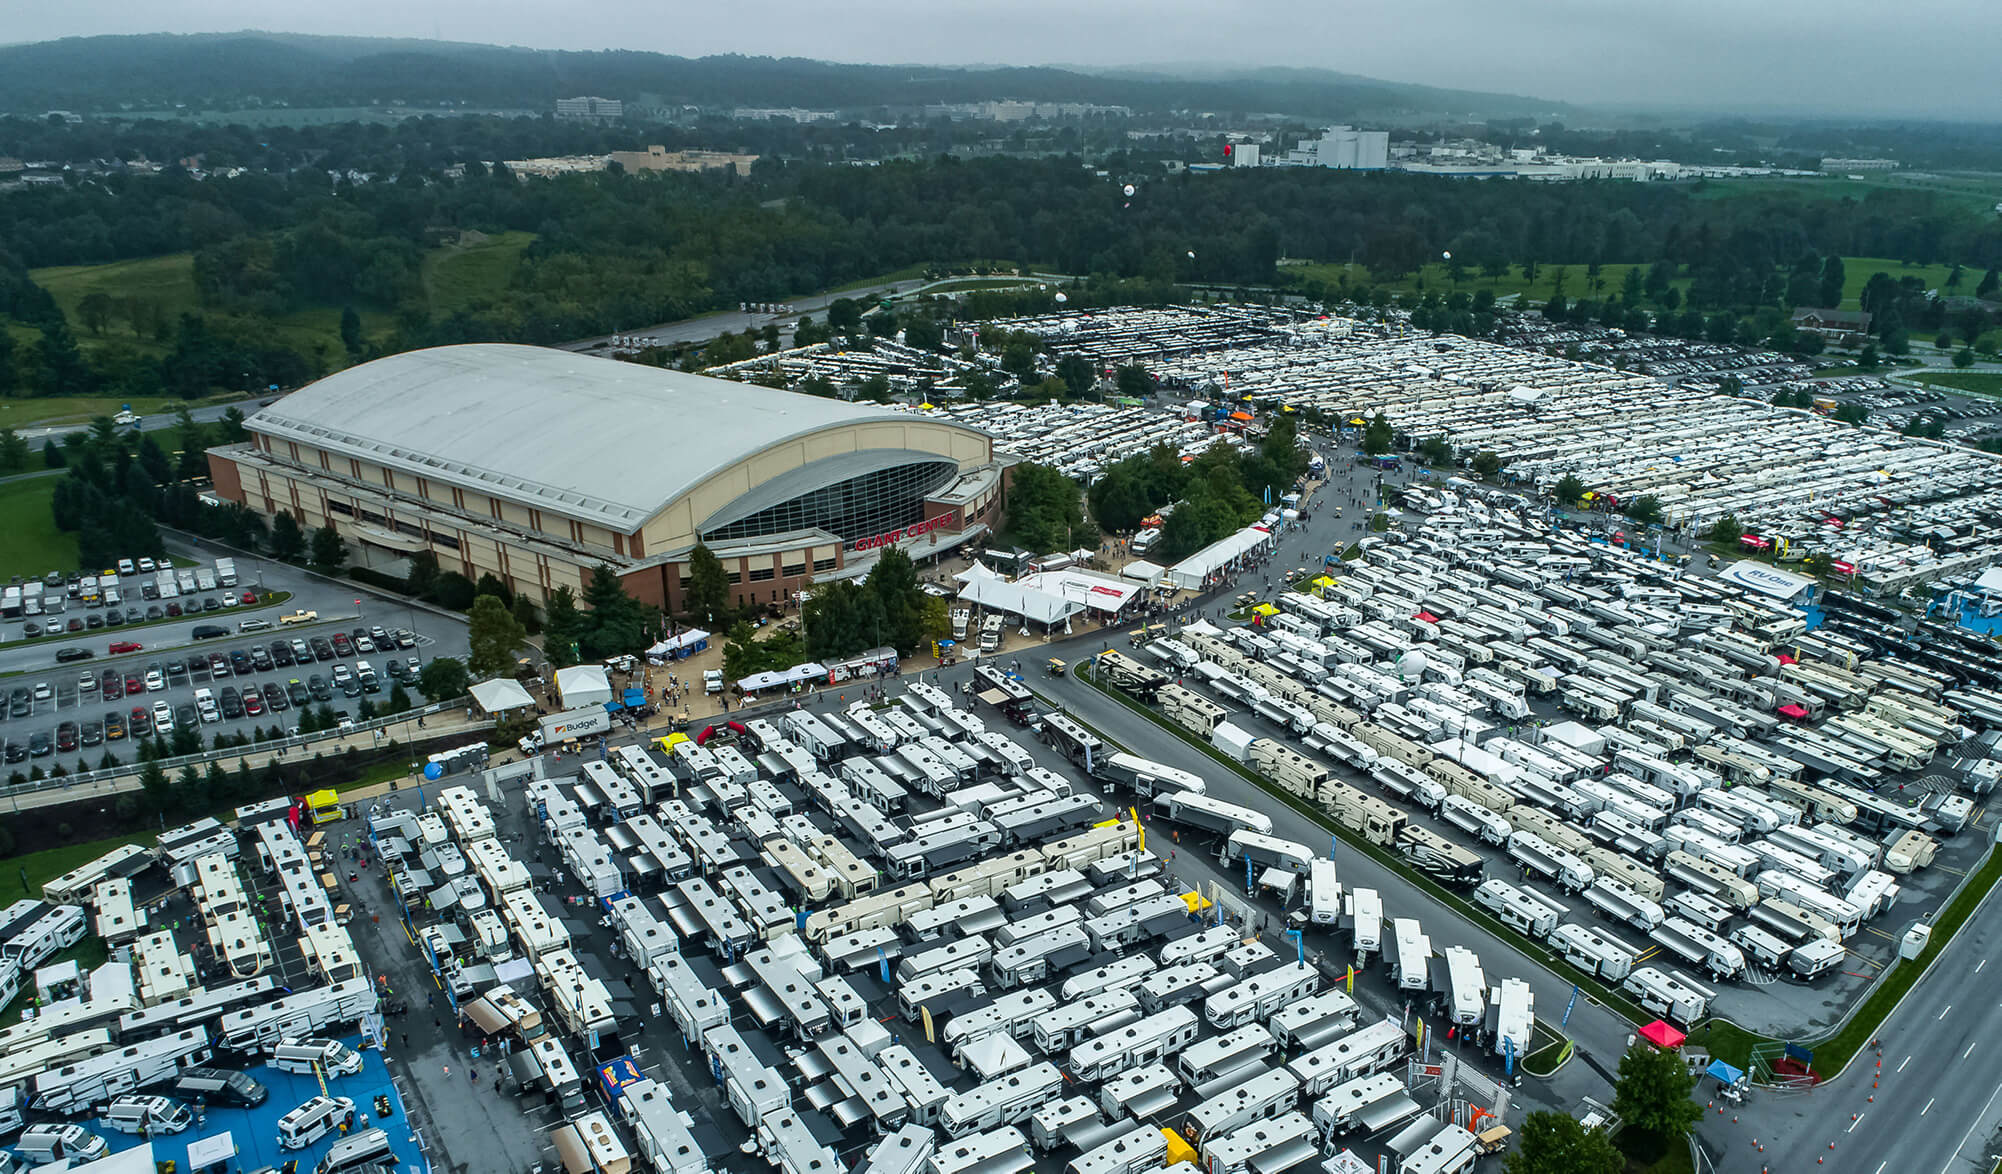 America's Largest RV Show